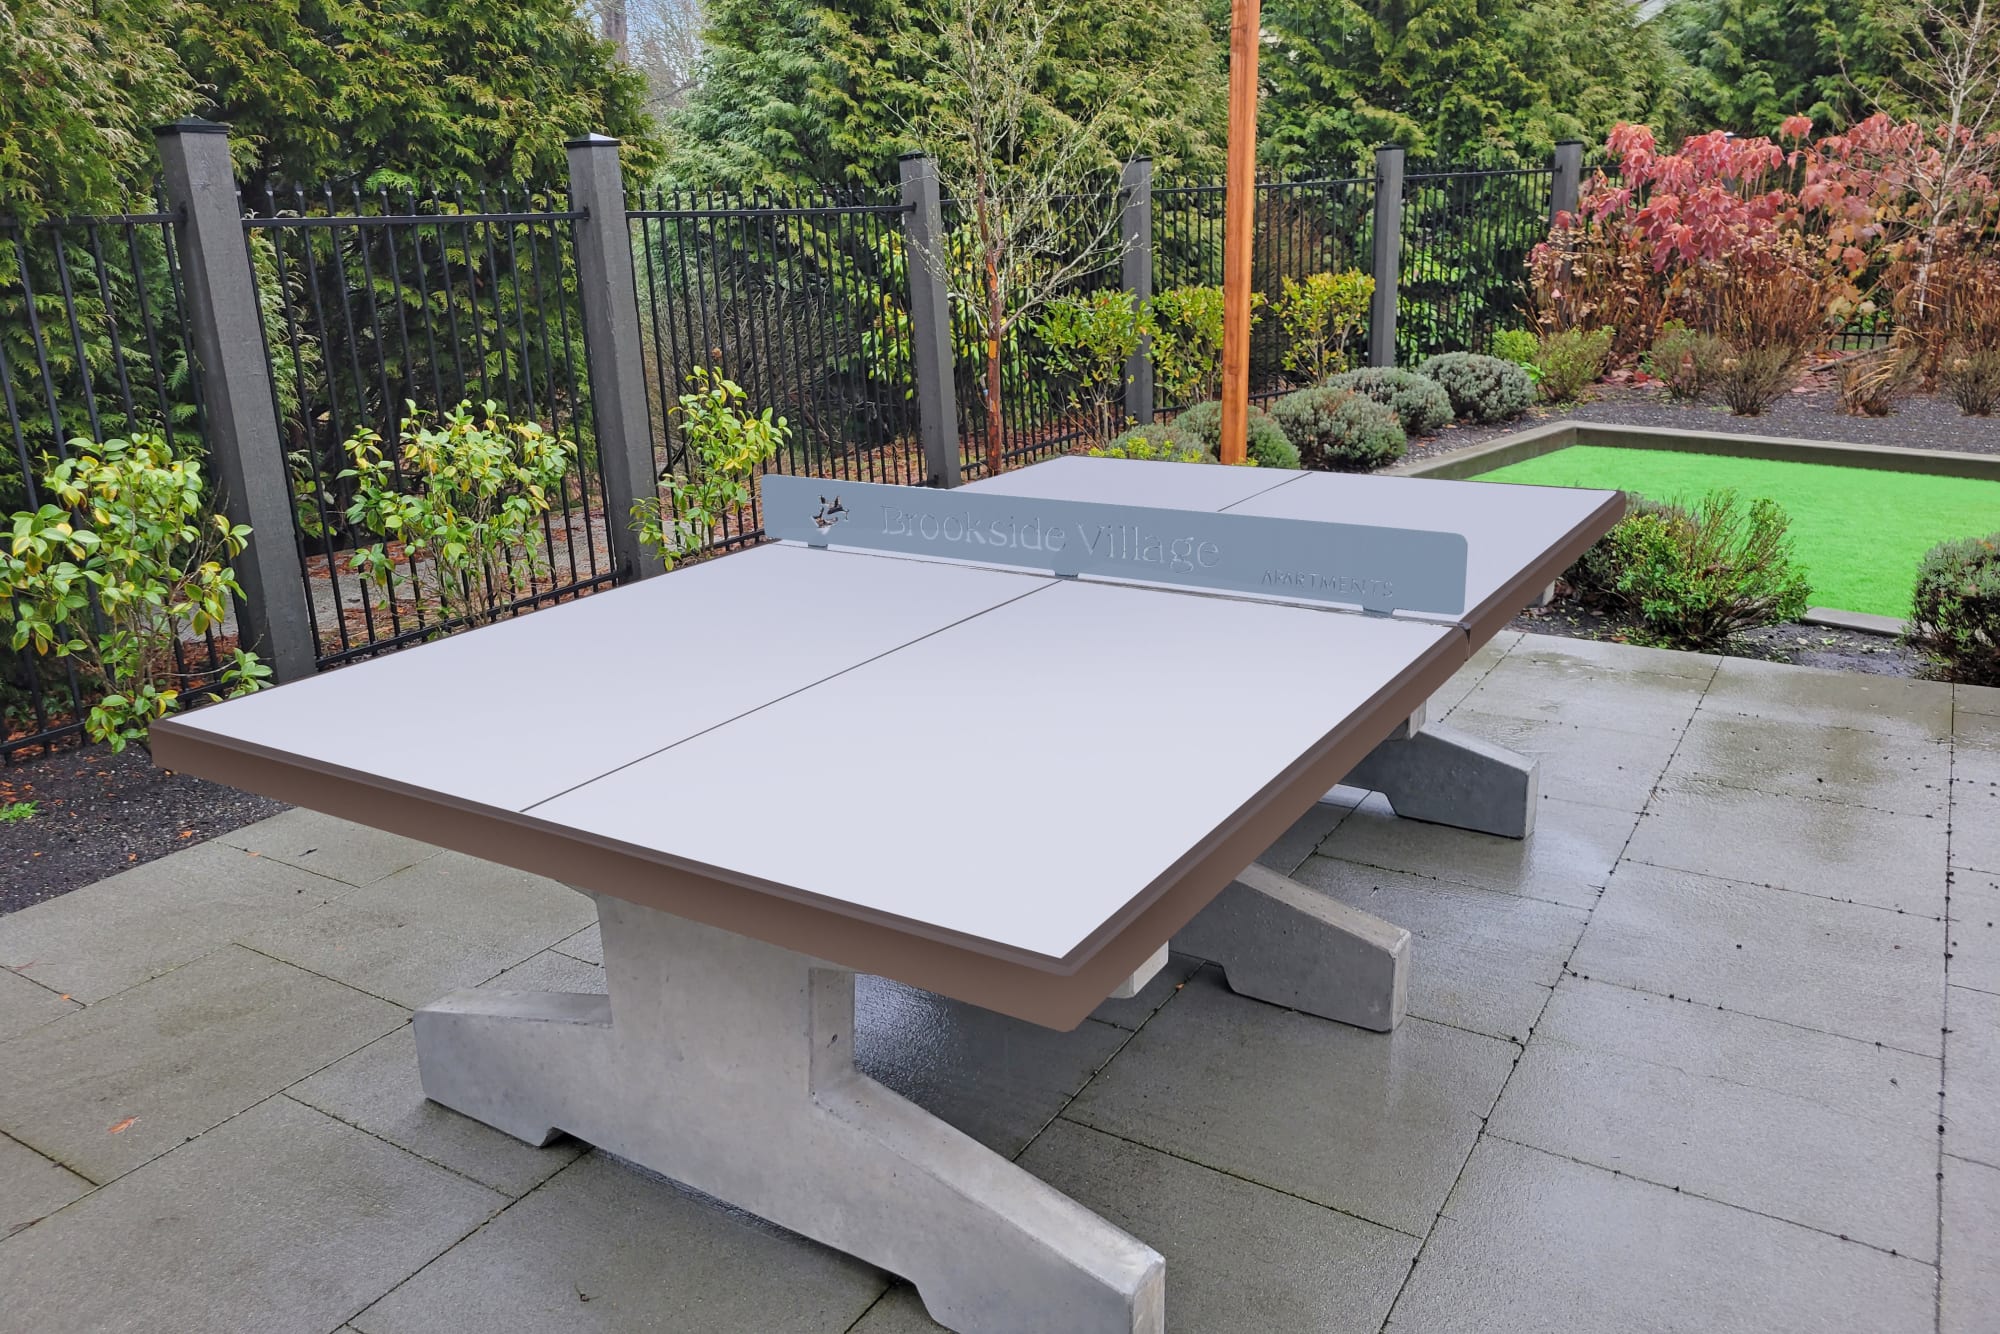 Outdoor Concrete Ping Pong Table at Brookside Village in Auburn, Washington